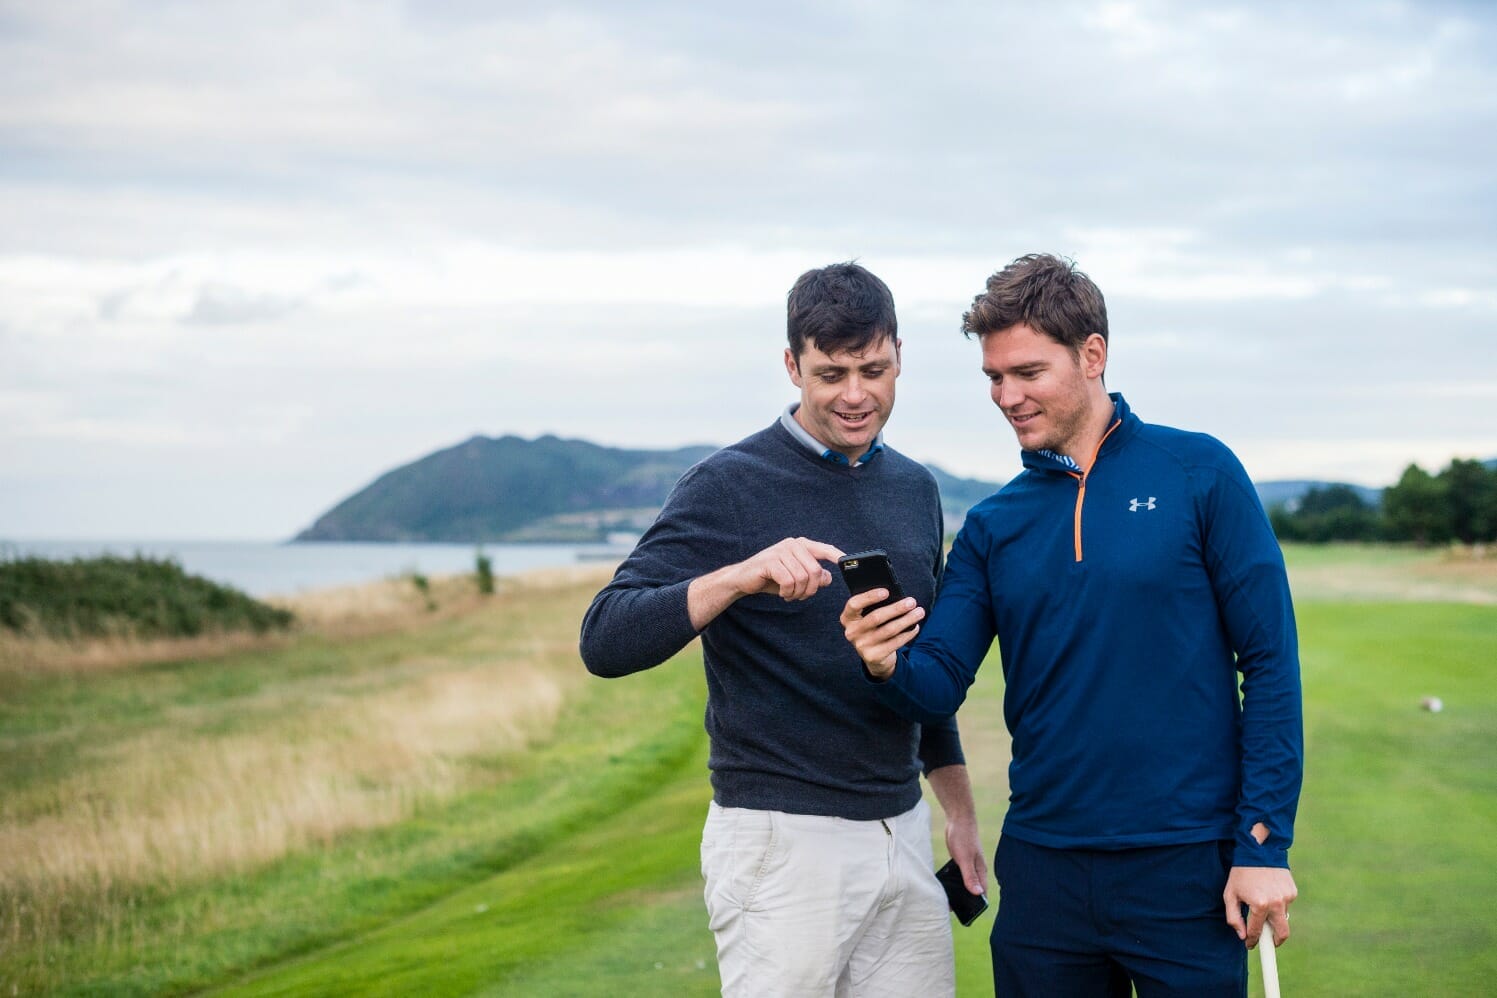 The new golf app modernising competitive golf